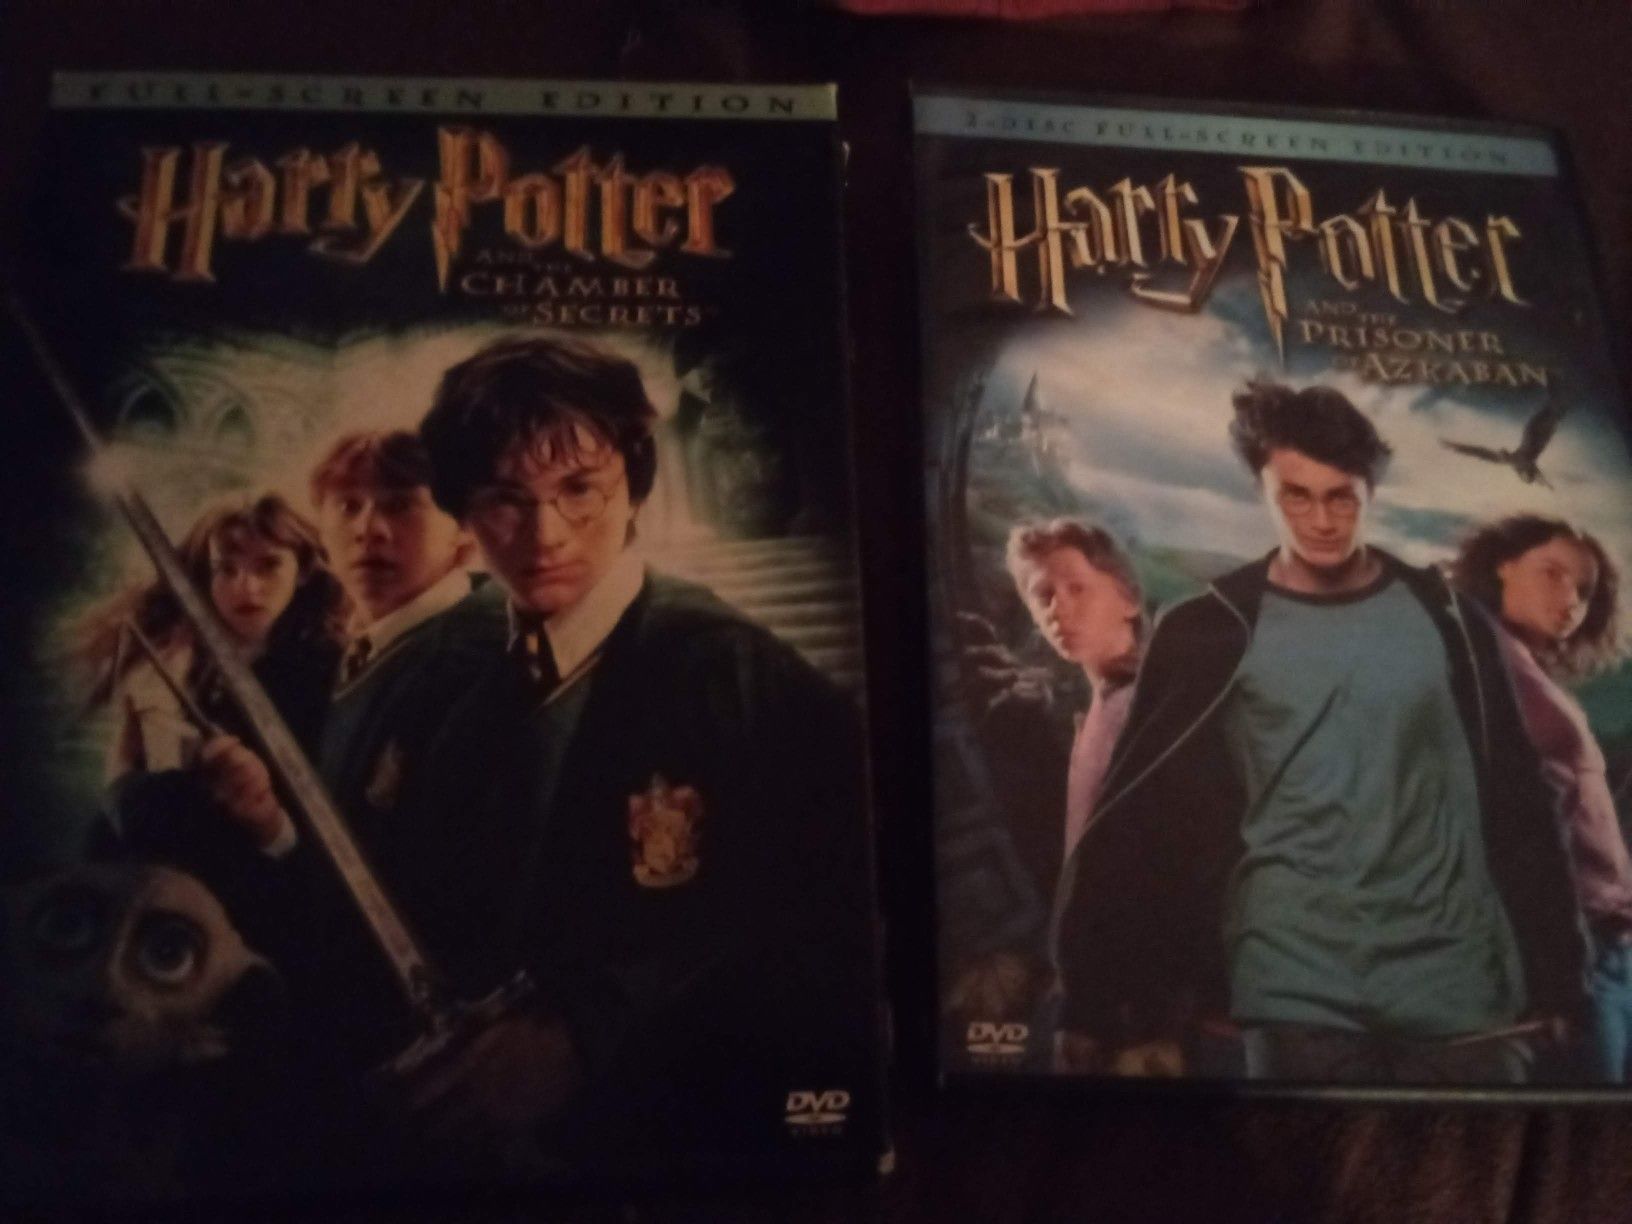 Harry Potter and the Chamber of Secrets and Potter and the Prisoner of Azkaban